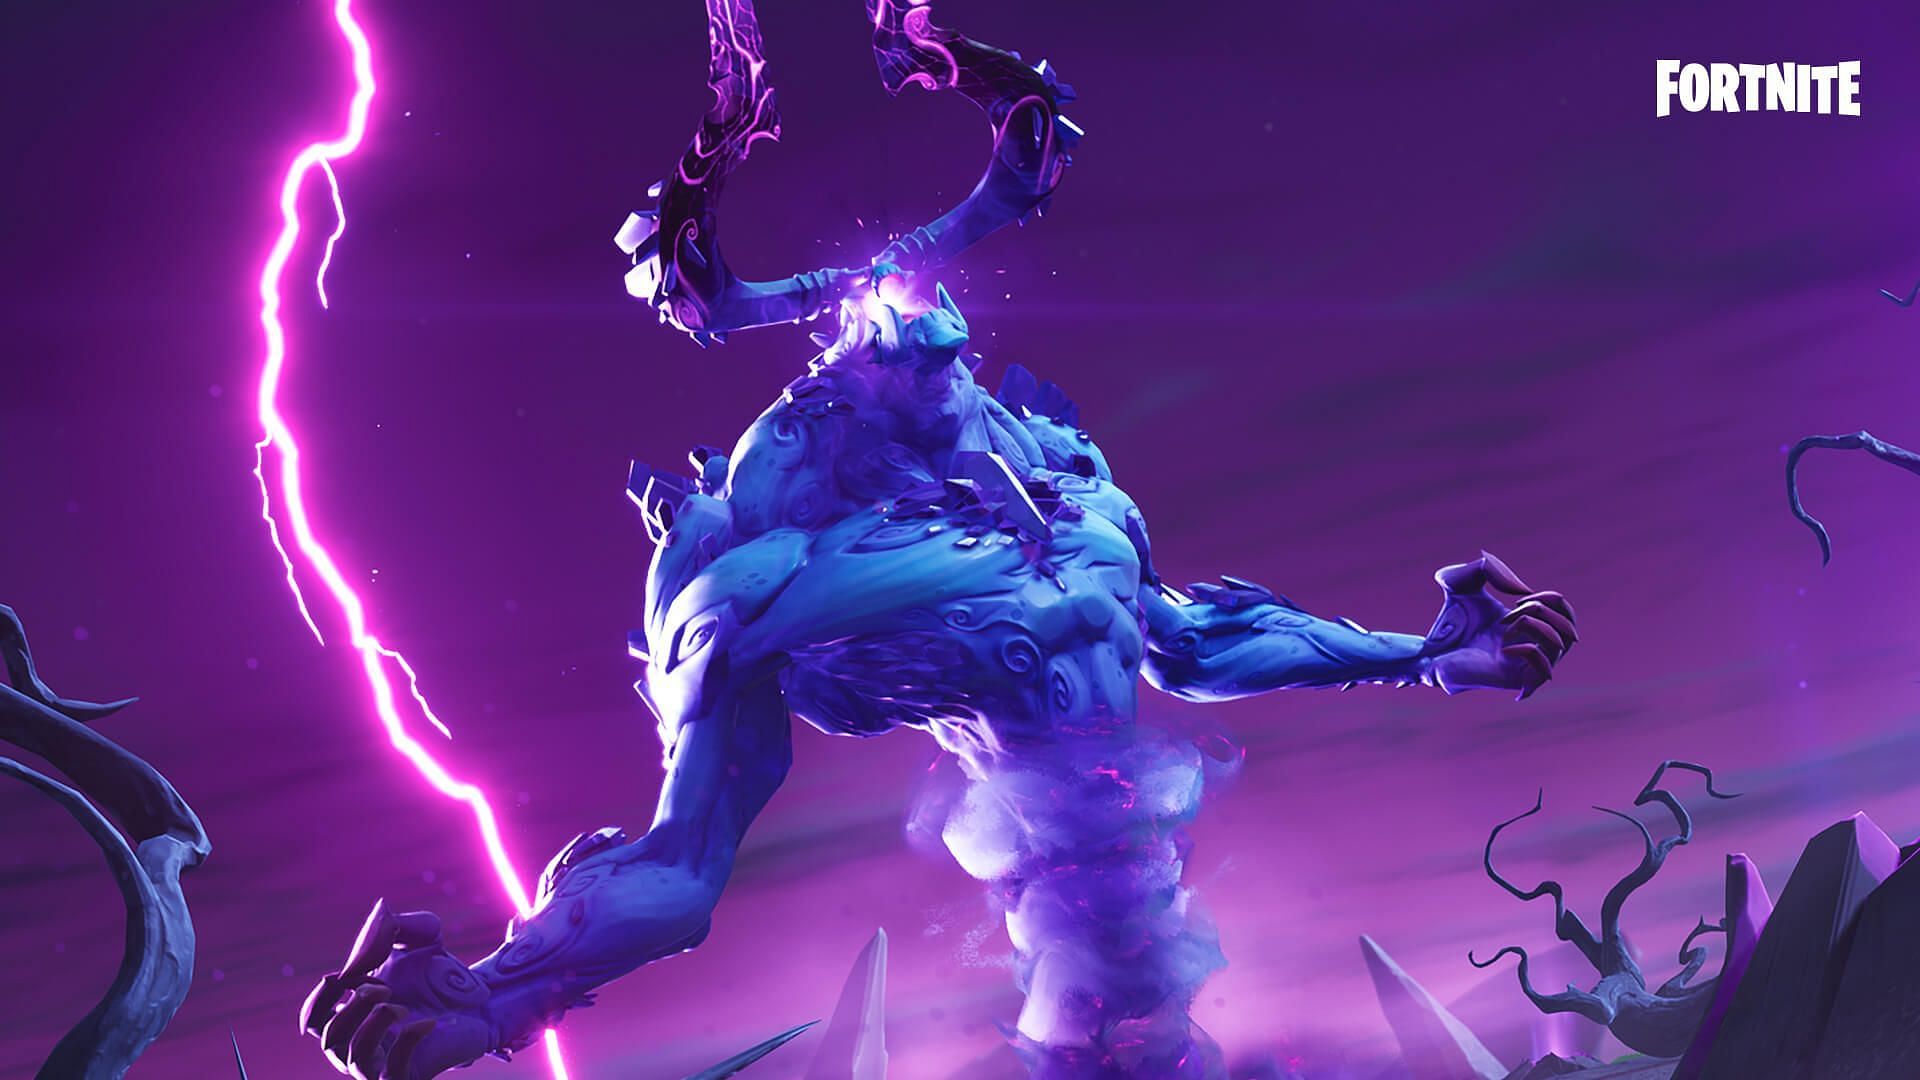 The Storm King was released alongside the Fortnite Halloween event a few years ago (Image via Epic Games)